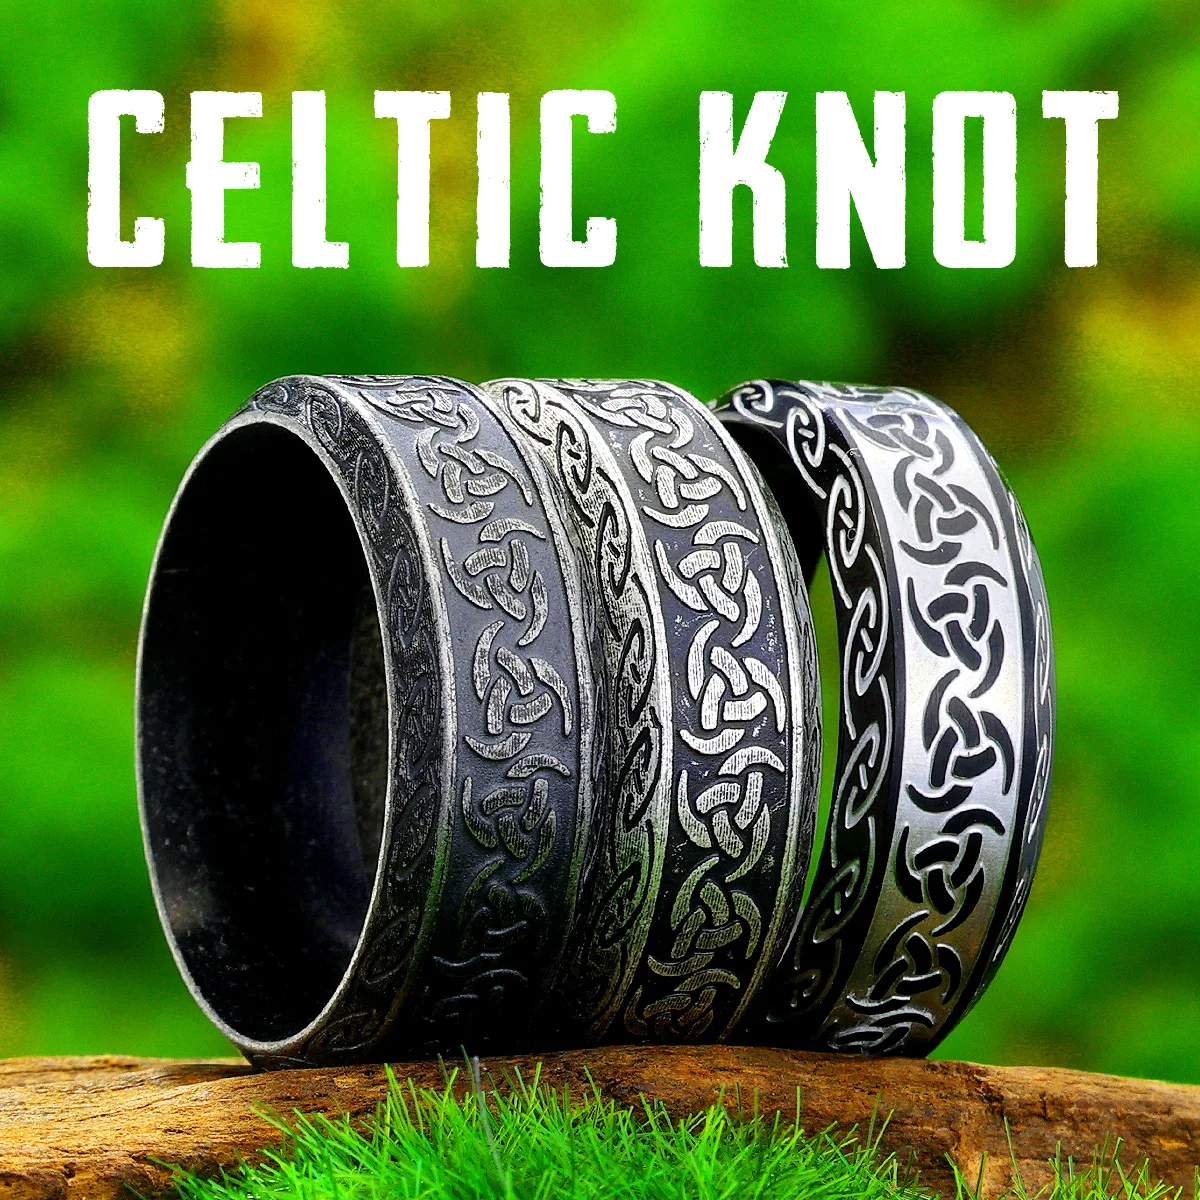 

Vintage Viking Celtic Knot Men Rings Stainless Steel Jewelry Punk Rock Cool Stuff Fashion Accessories for Women Gift Wholesale